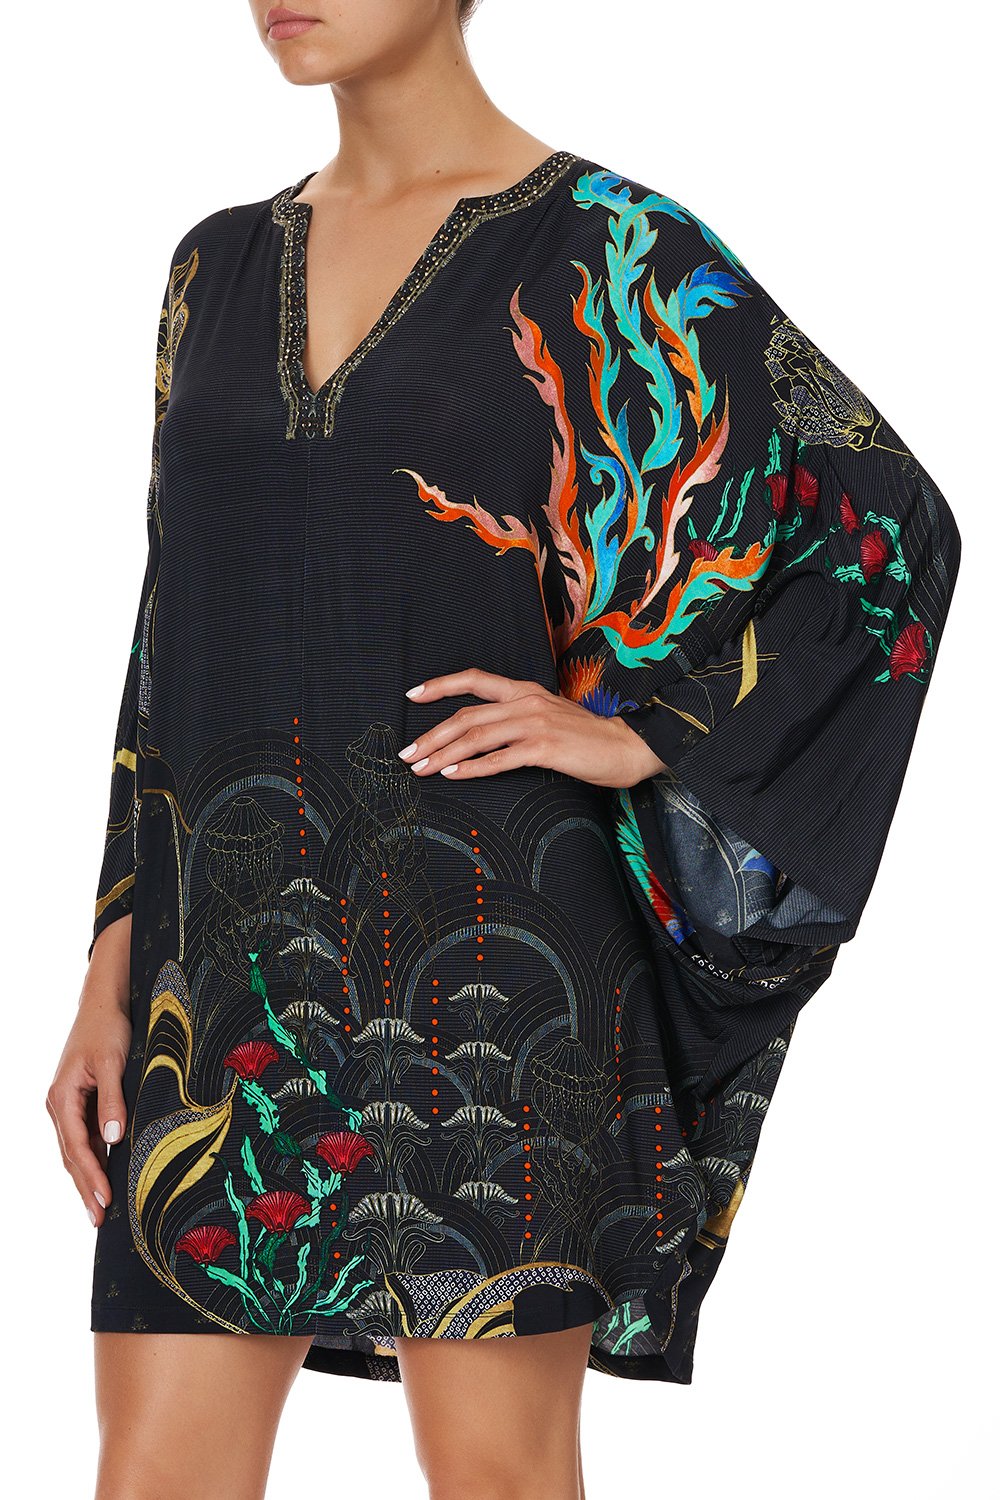 JERSEY SHORT KAFTAN WITH CURVED HEM WISE WINGS